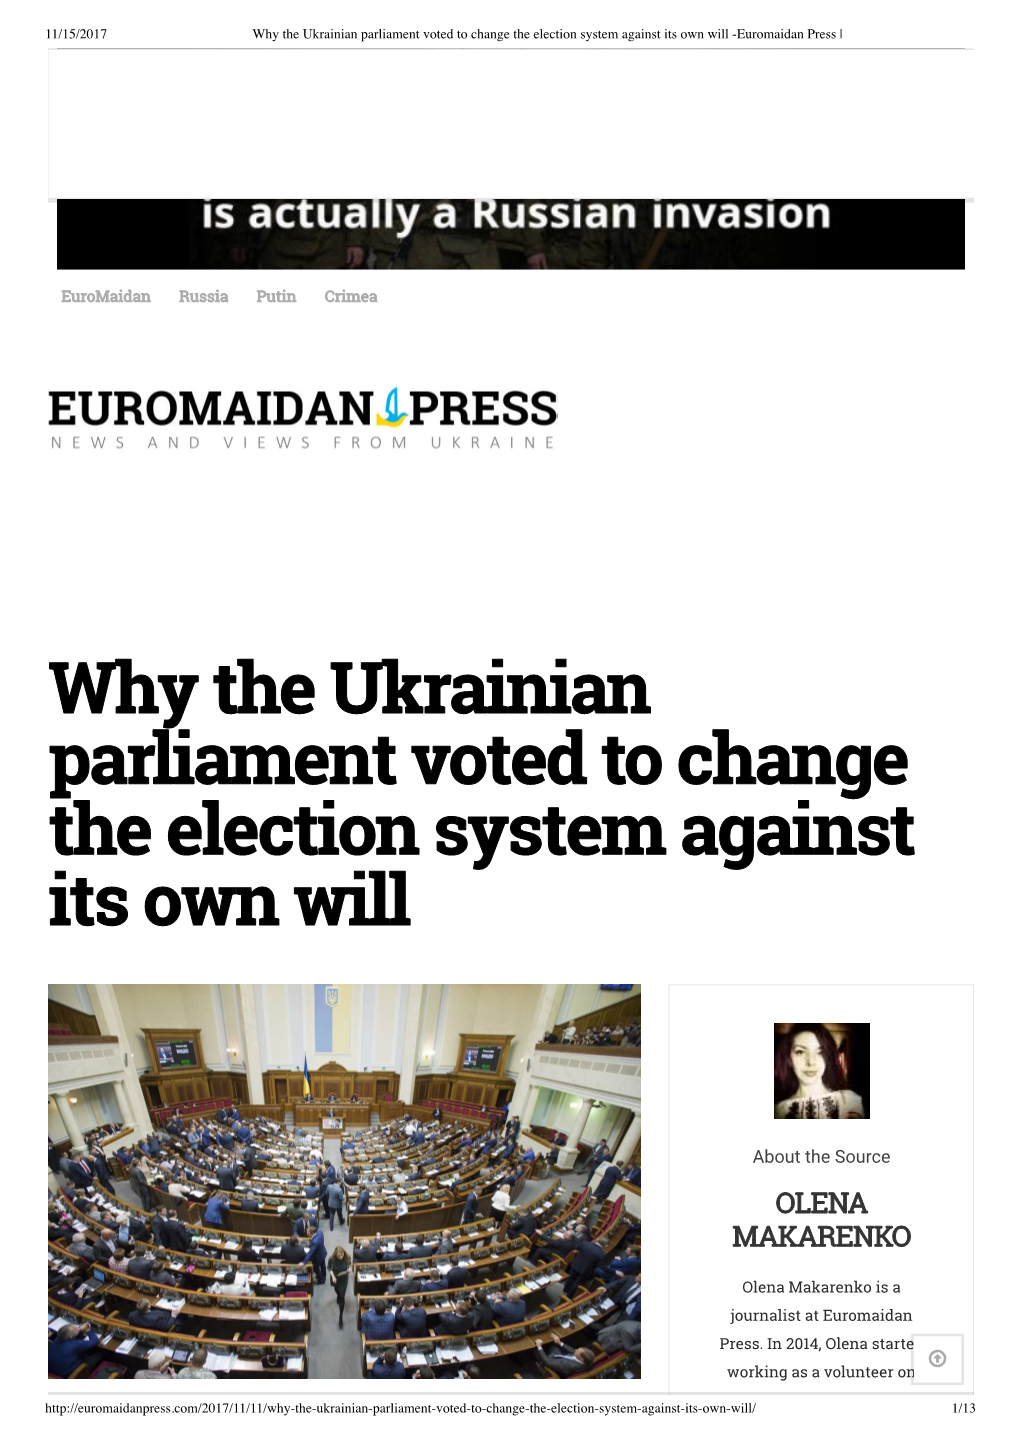 Why the Ukrainian Parliament Voted to Change the Election System Against Its Own Will -Euromaidan Press |